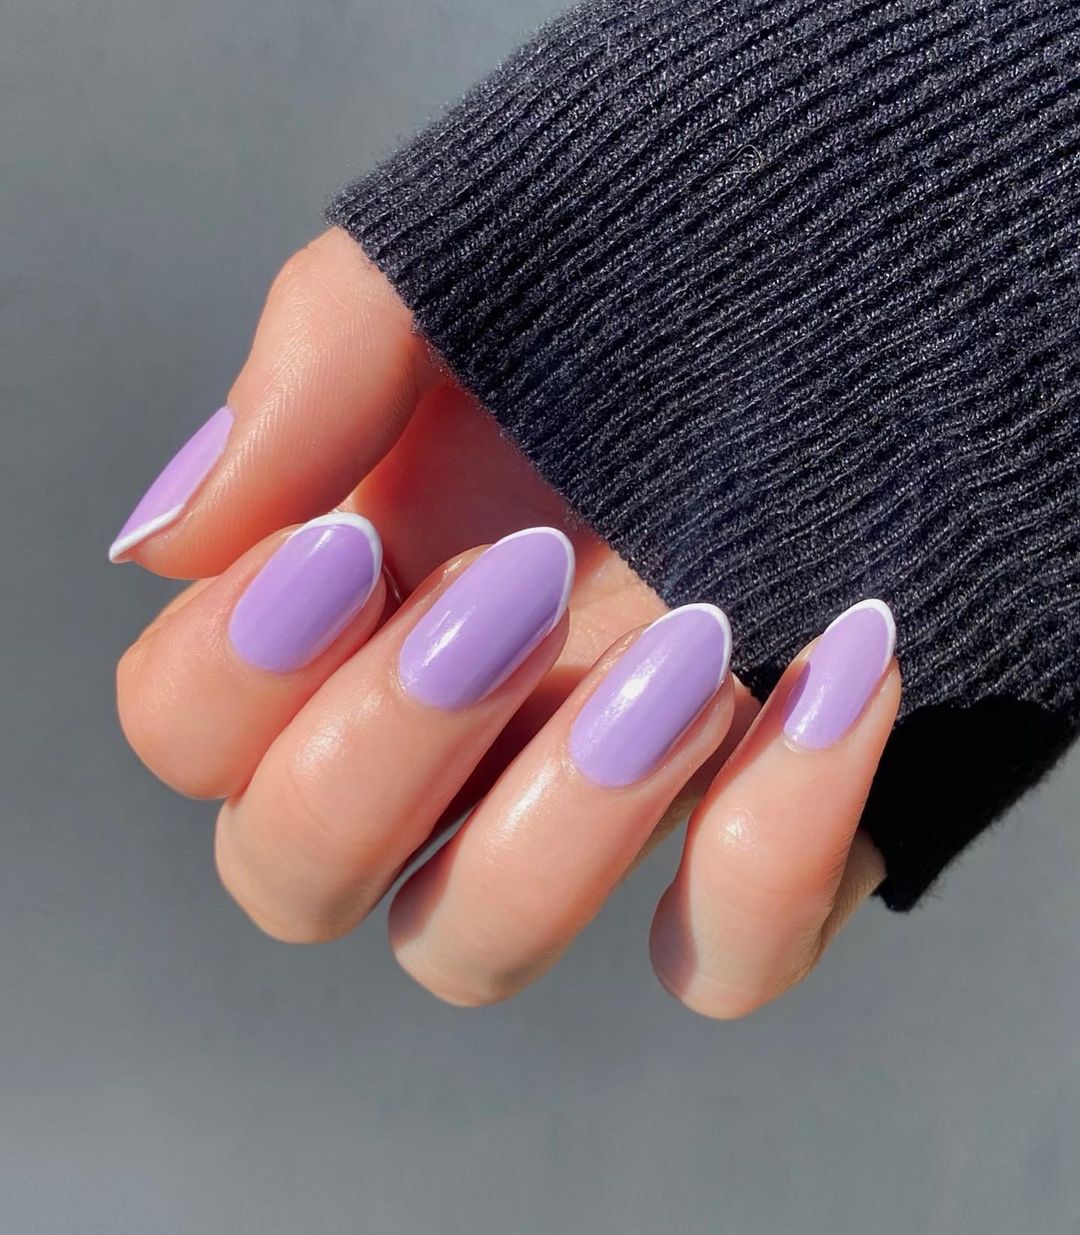 Purple Medium Length Almond Nails with White Tips